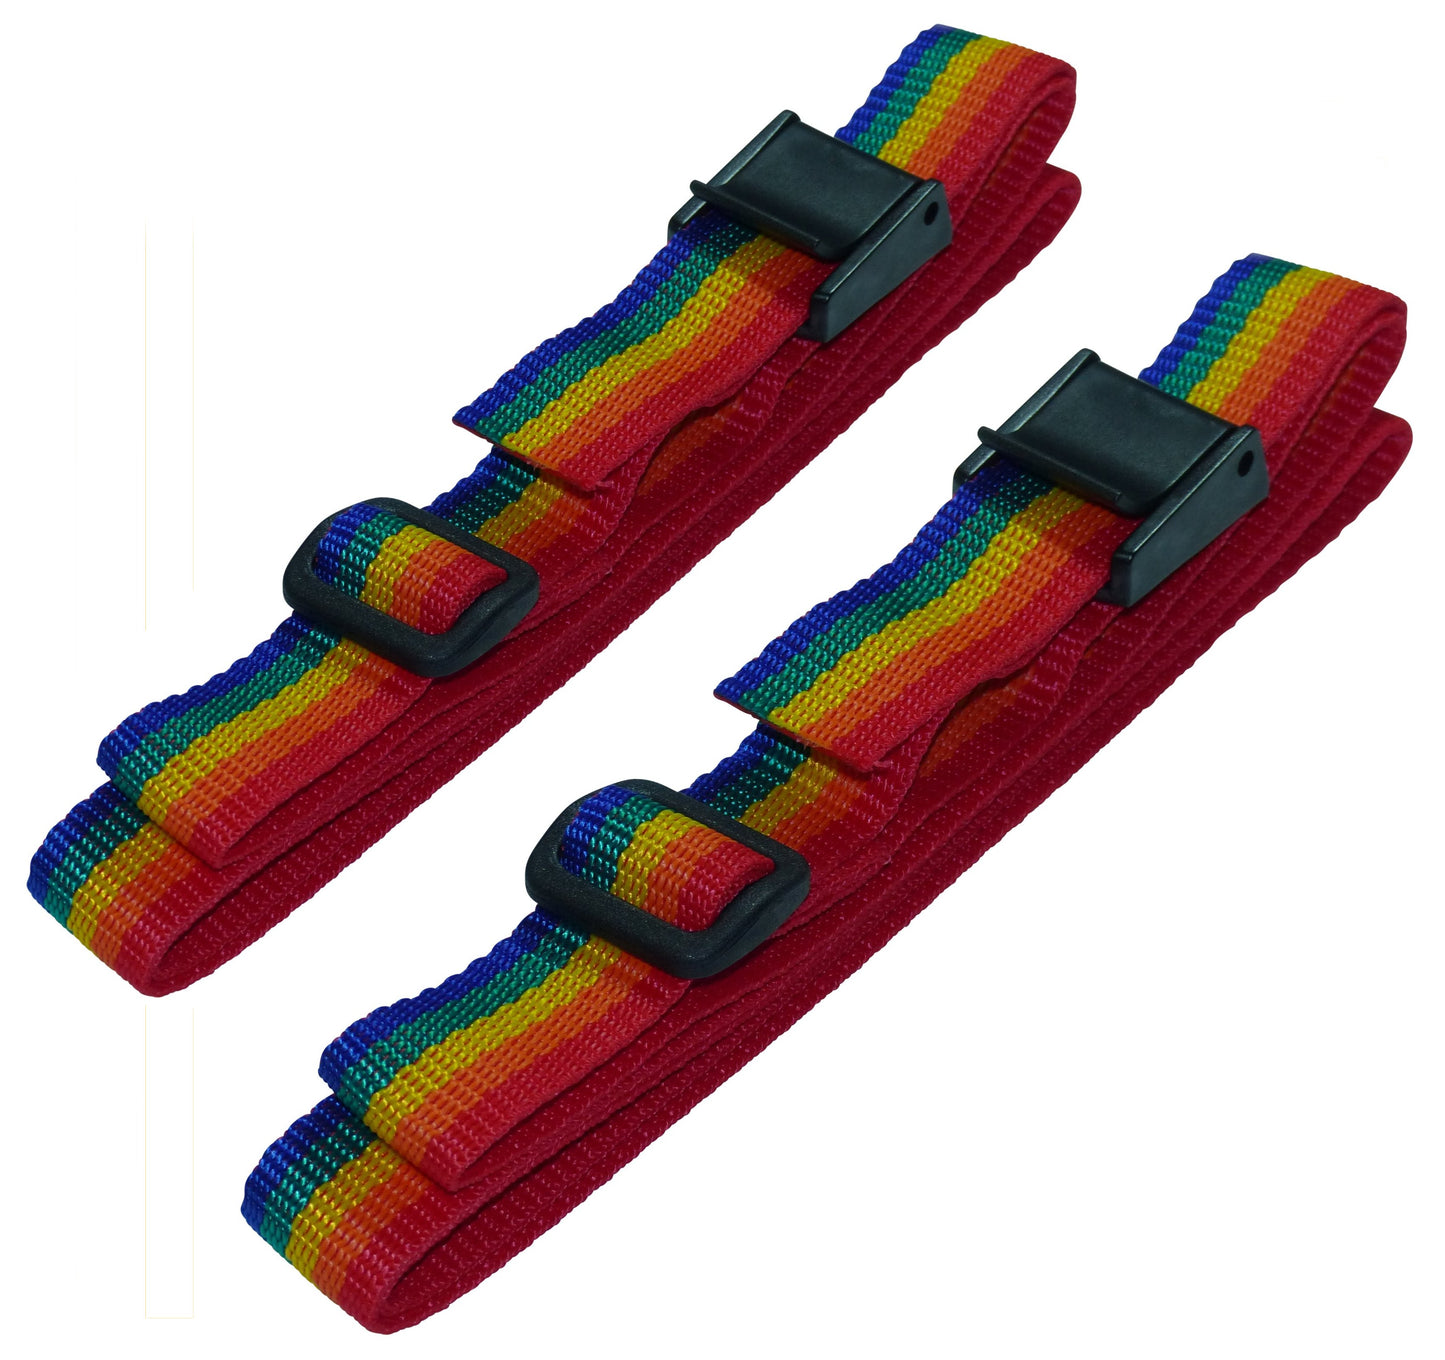 25mm Rivetted Strap with Plastic Cam Buckle & Triglide Buckles (Pair) in rainbow